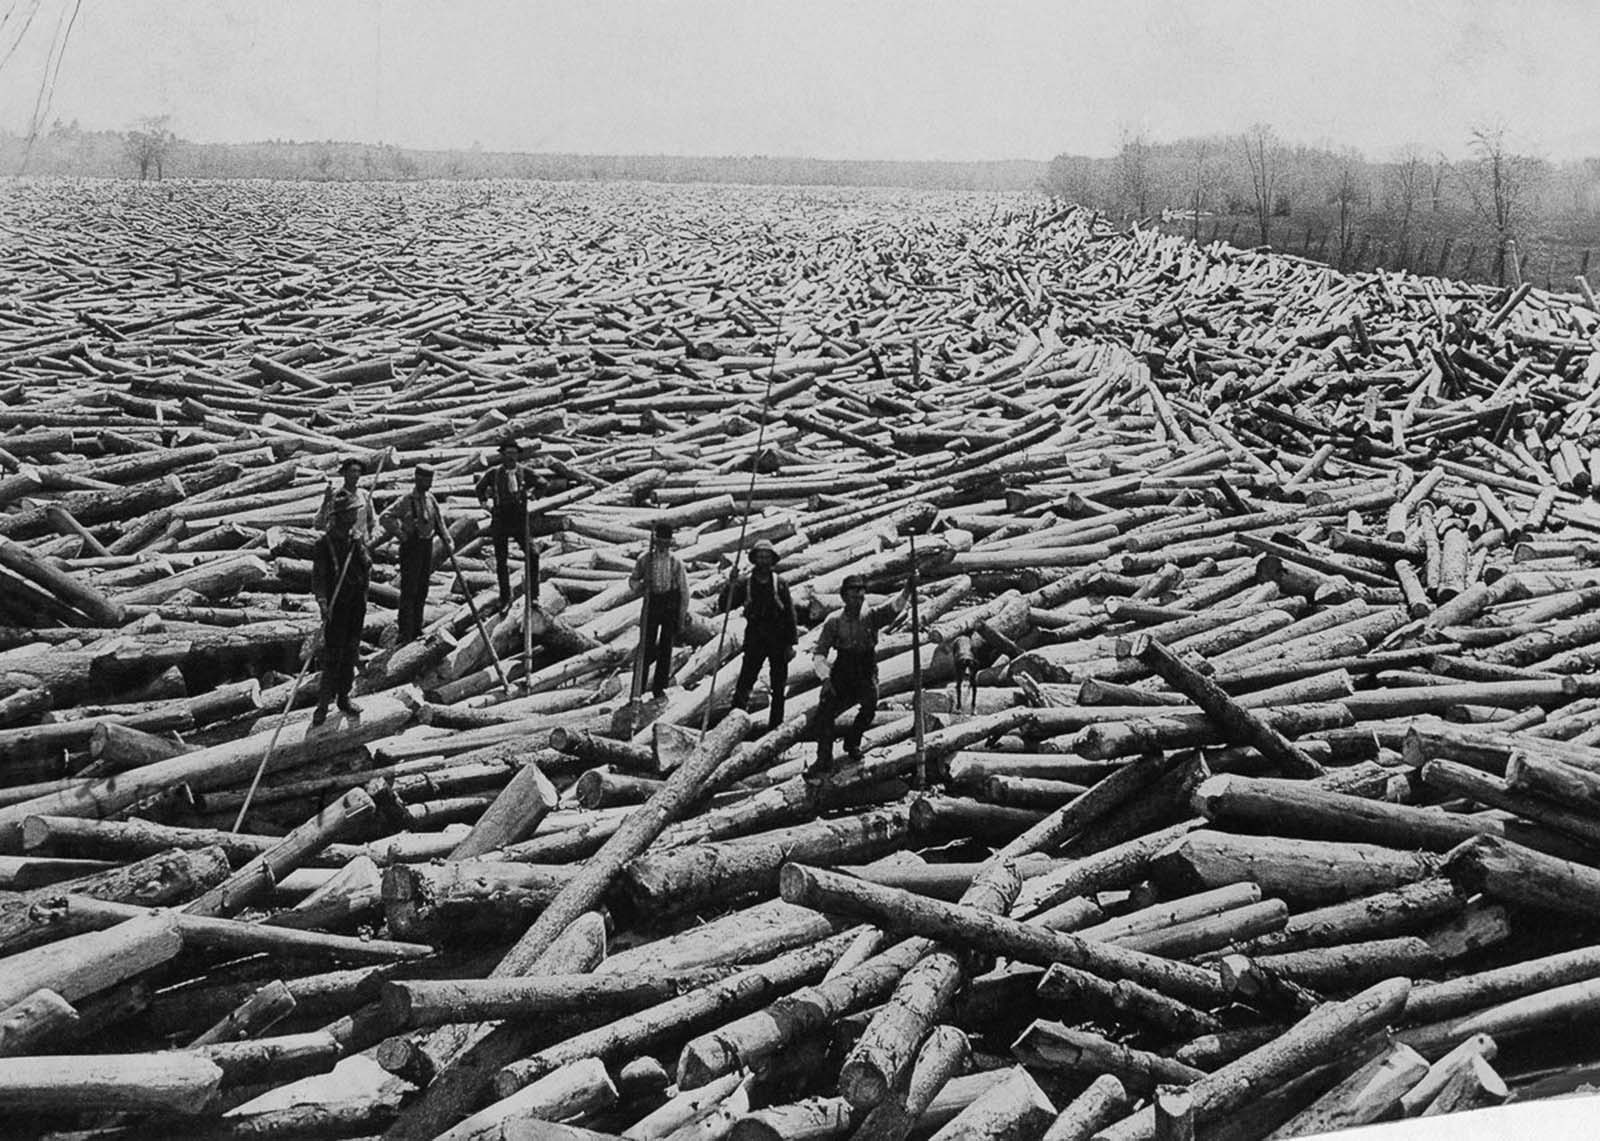 Men stand on piles of cut trees in rural New York, 1907.